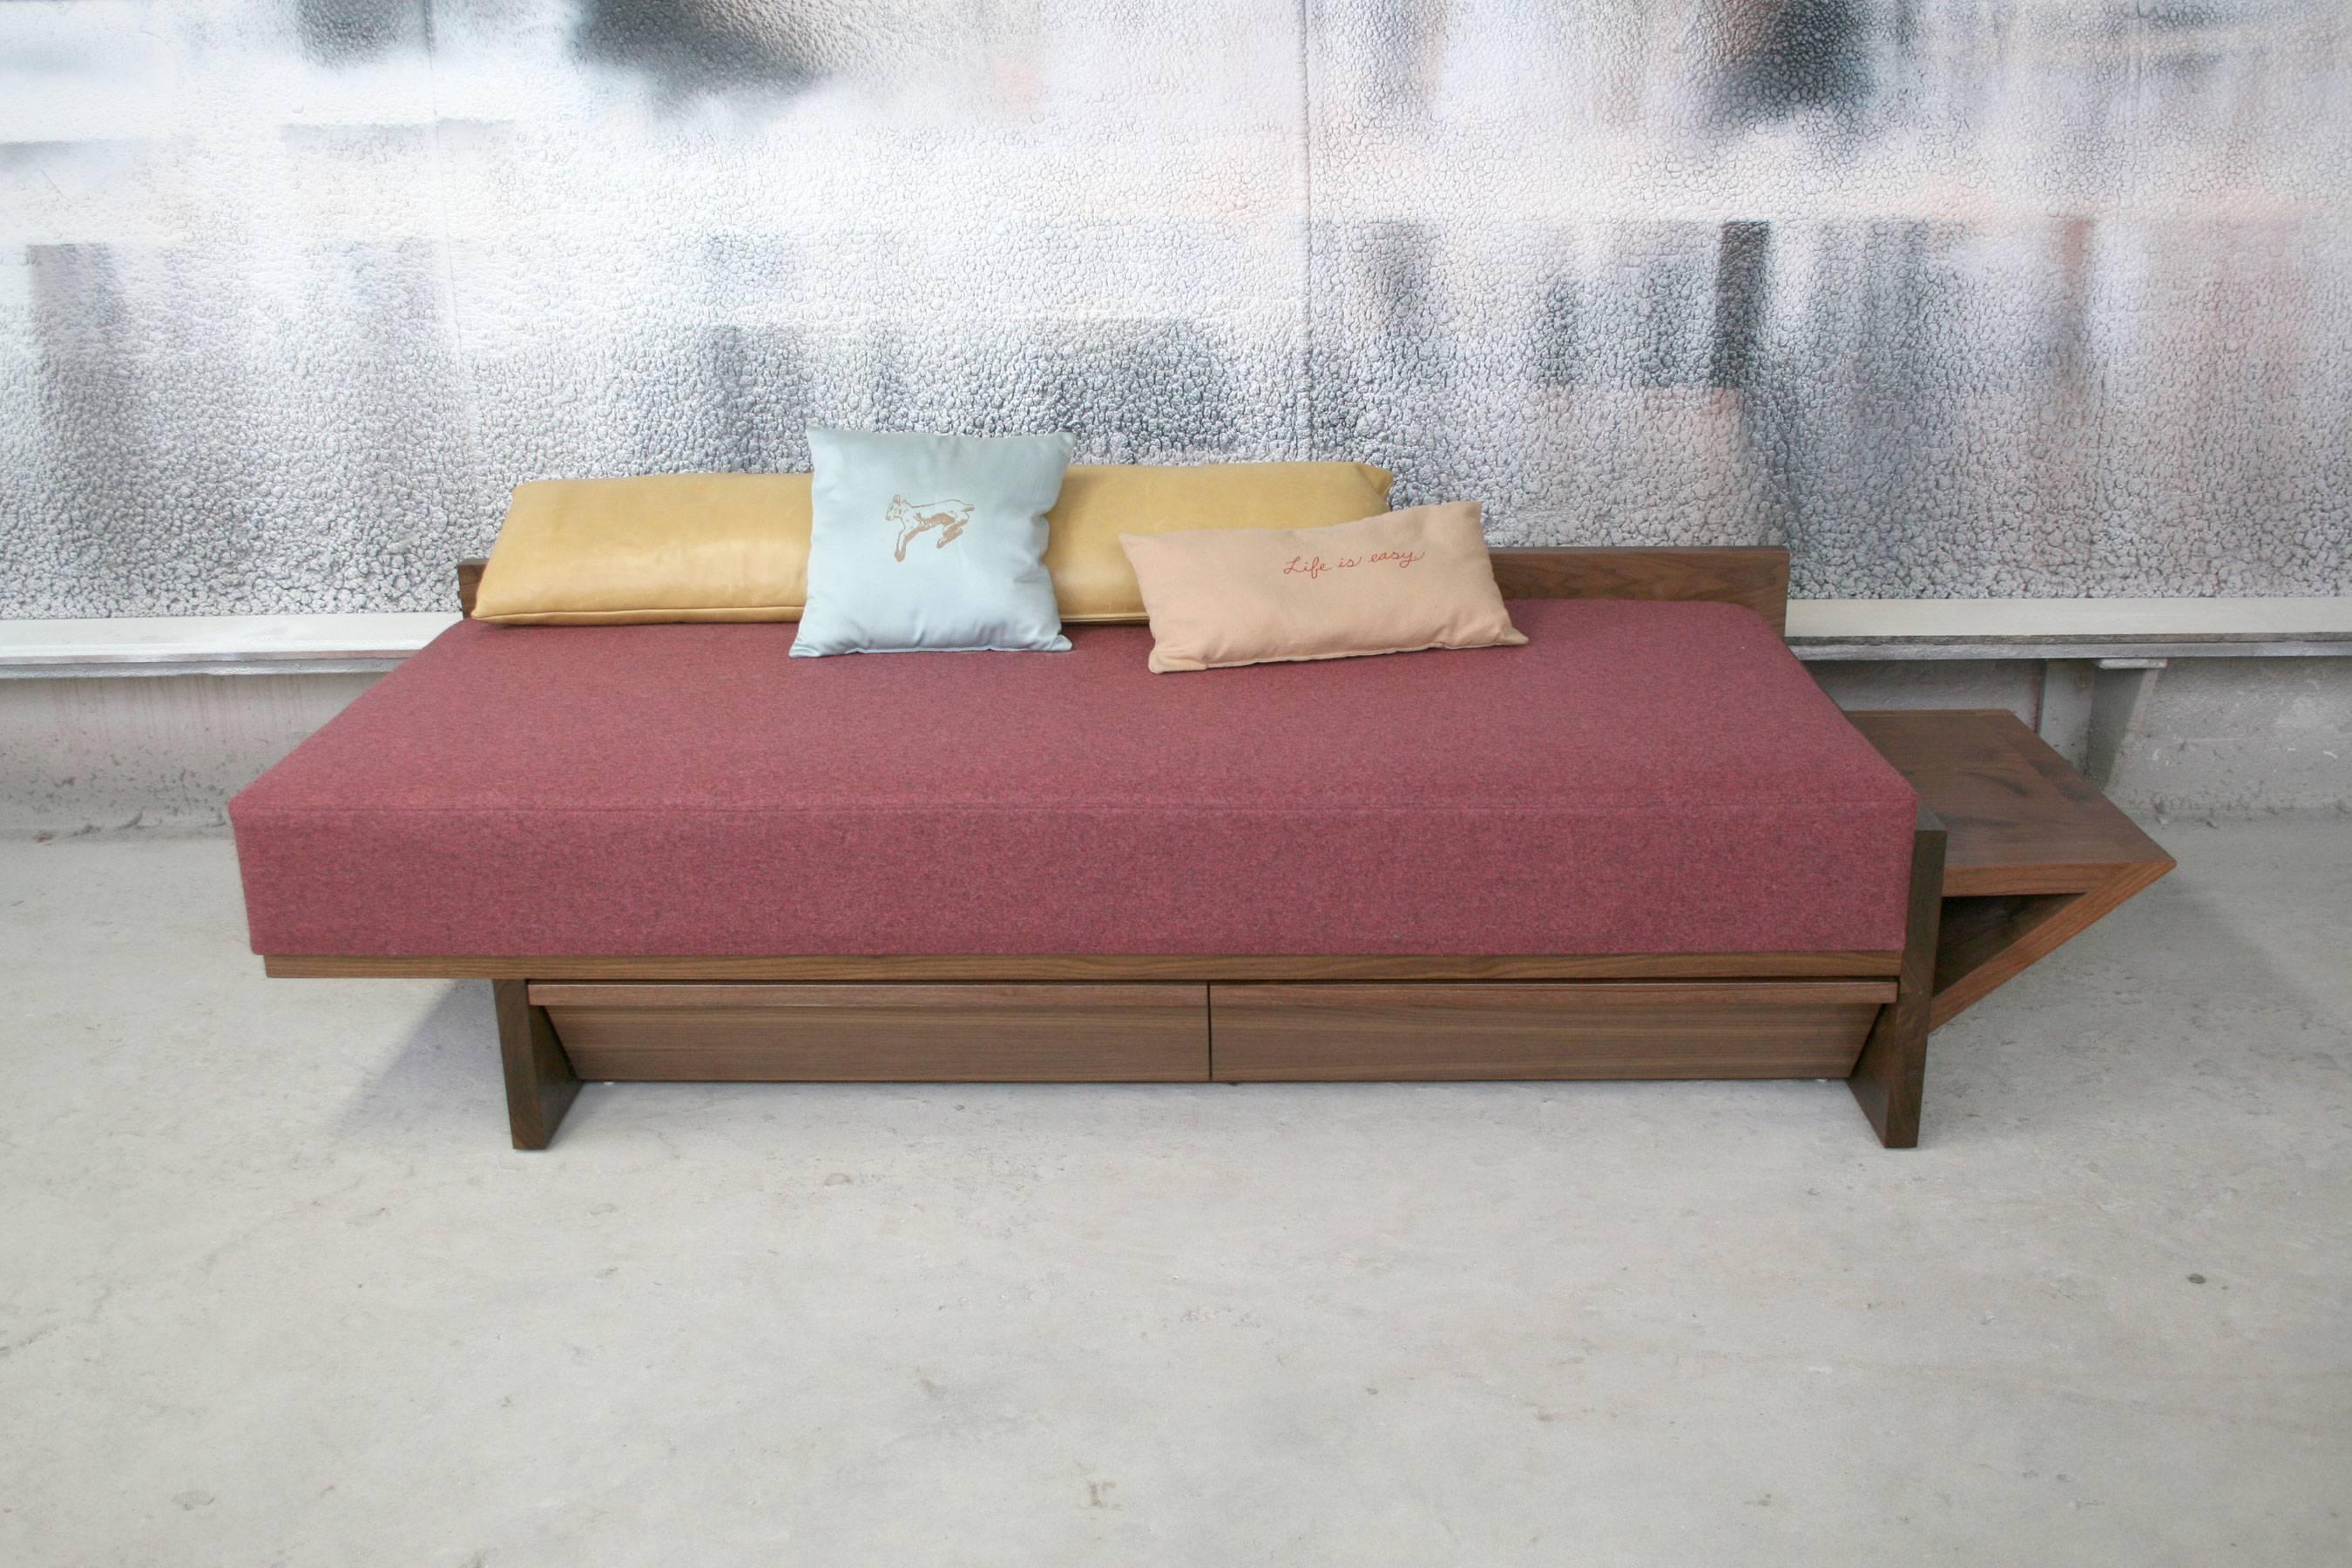 Shimna Lagan Daybed with Hidden Storage Drawers In Excellent Condition For Sale In Brooklyn, NY